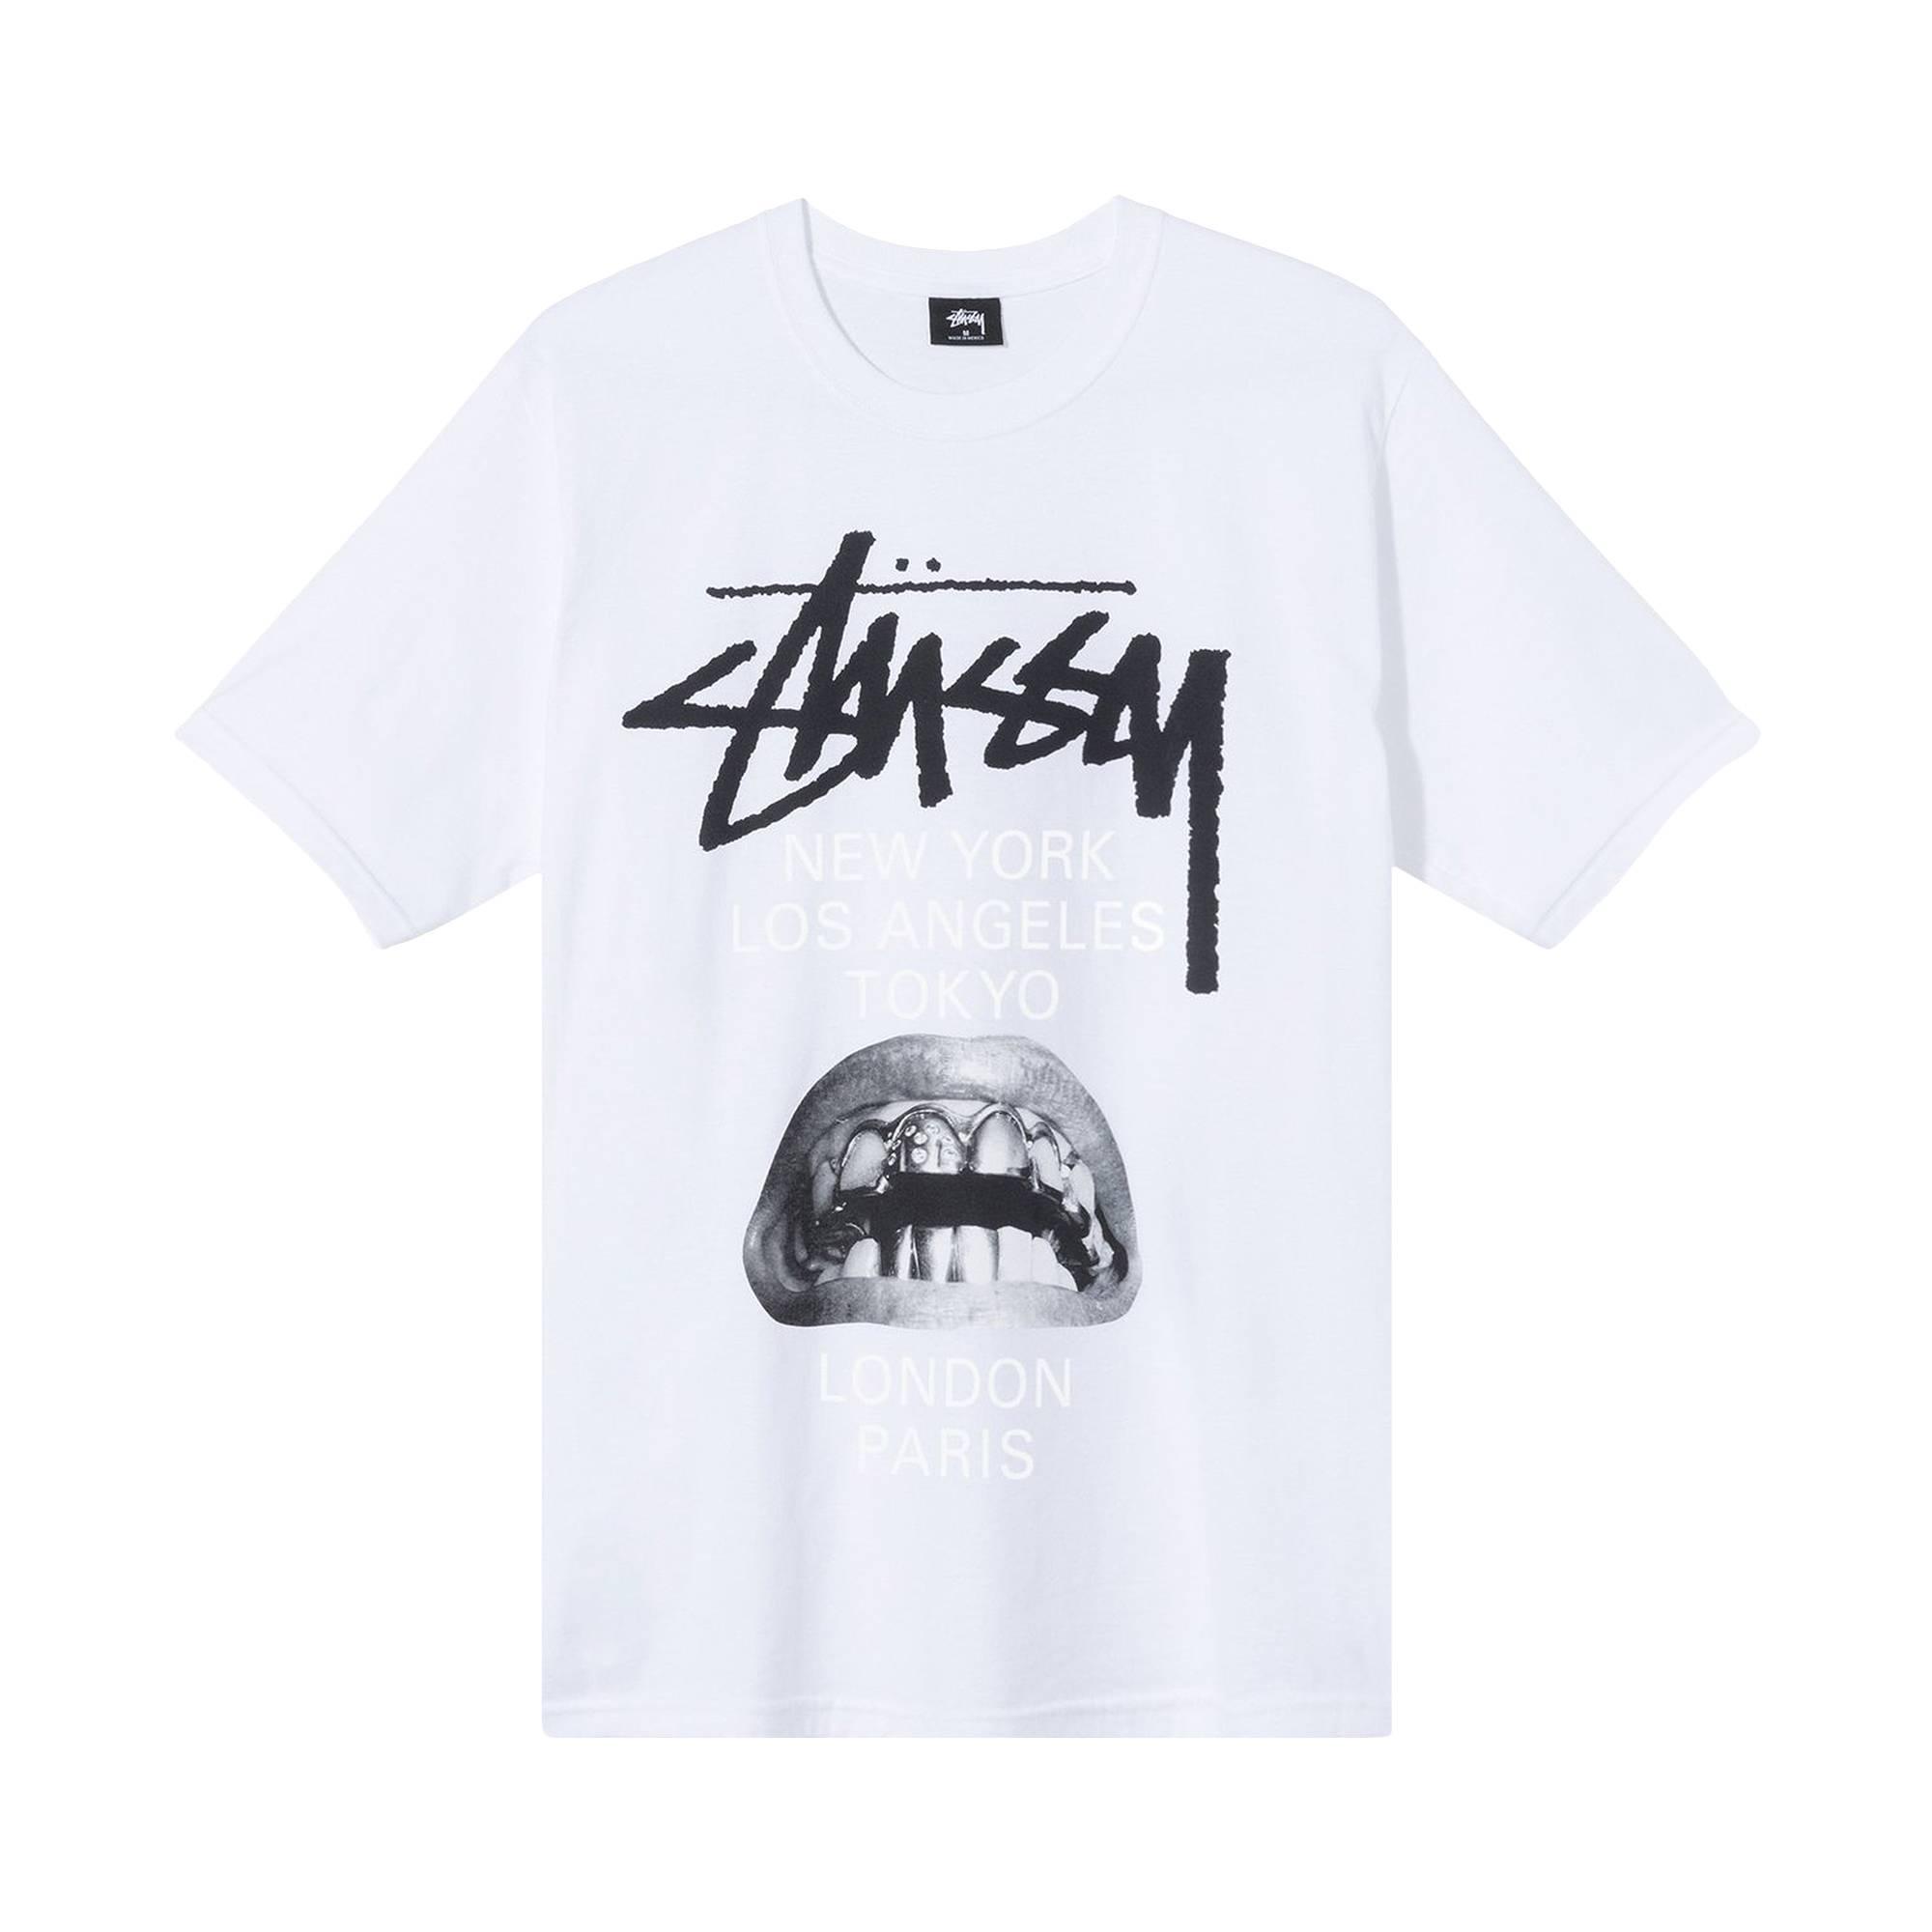 Collection t me. Stussy x Rick Owens футболка. Stussy Rick Owens t Shirt. Rick Owens Tshirt Stussy. Rick Owens Stussy Tee.